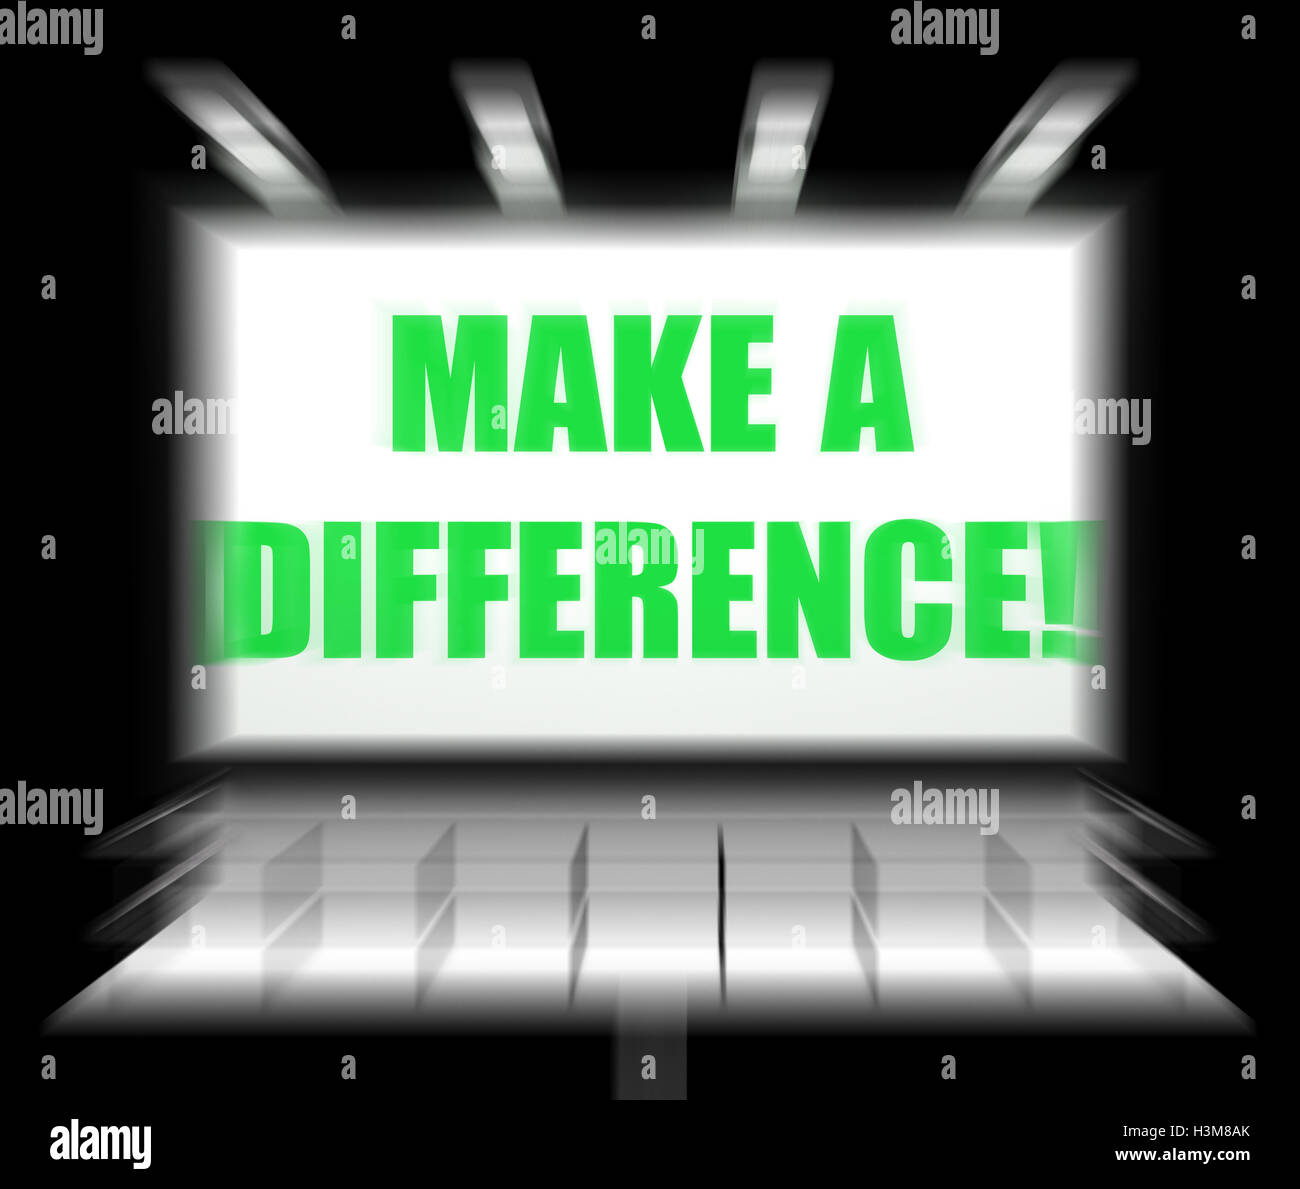 Make a Difference Sign Displays Motivation for Causing Change Stock Photo